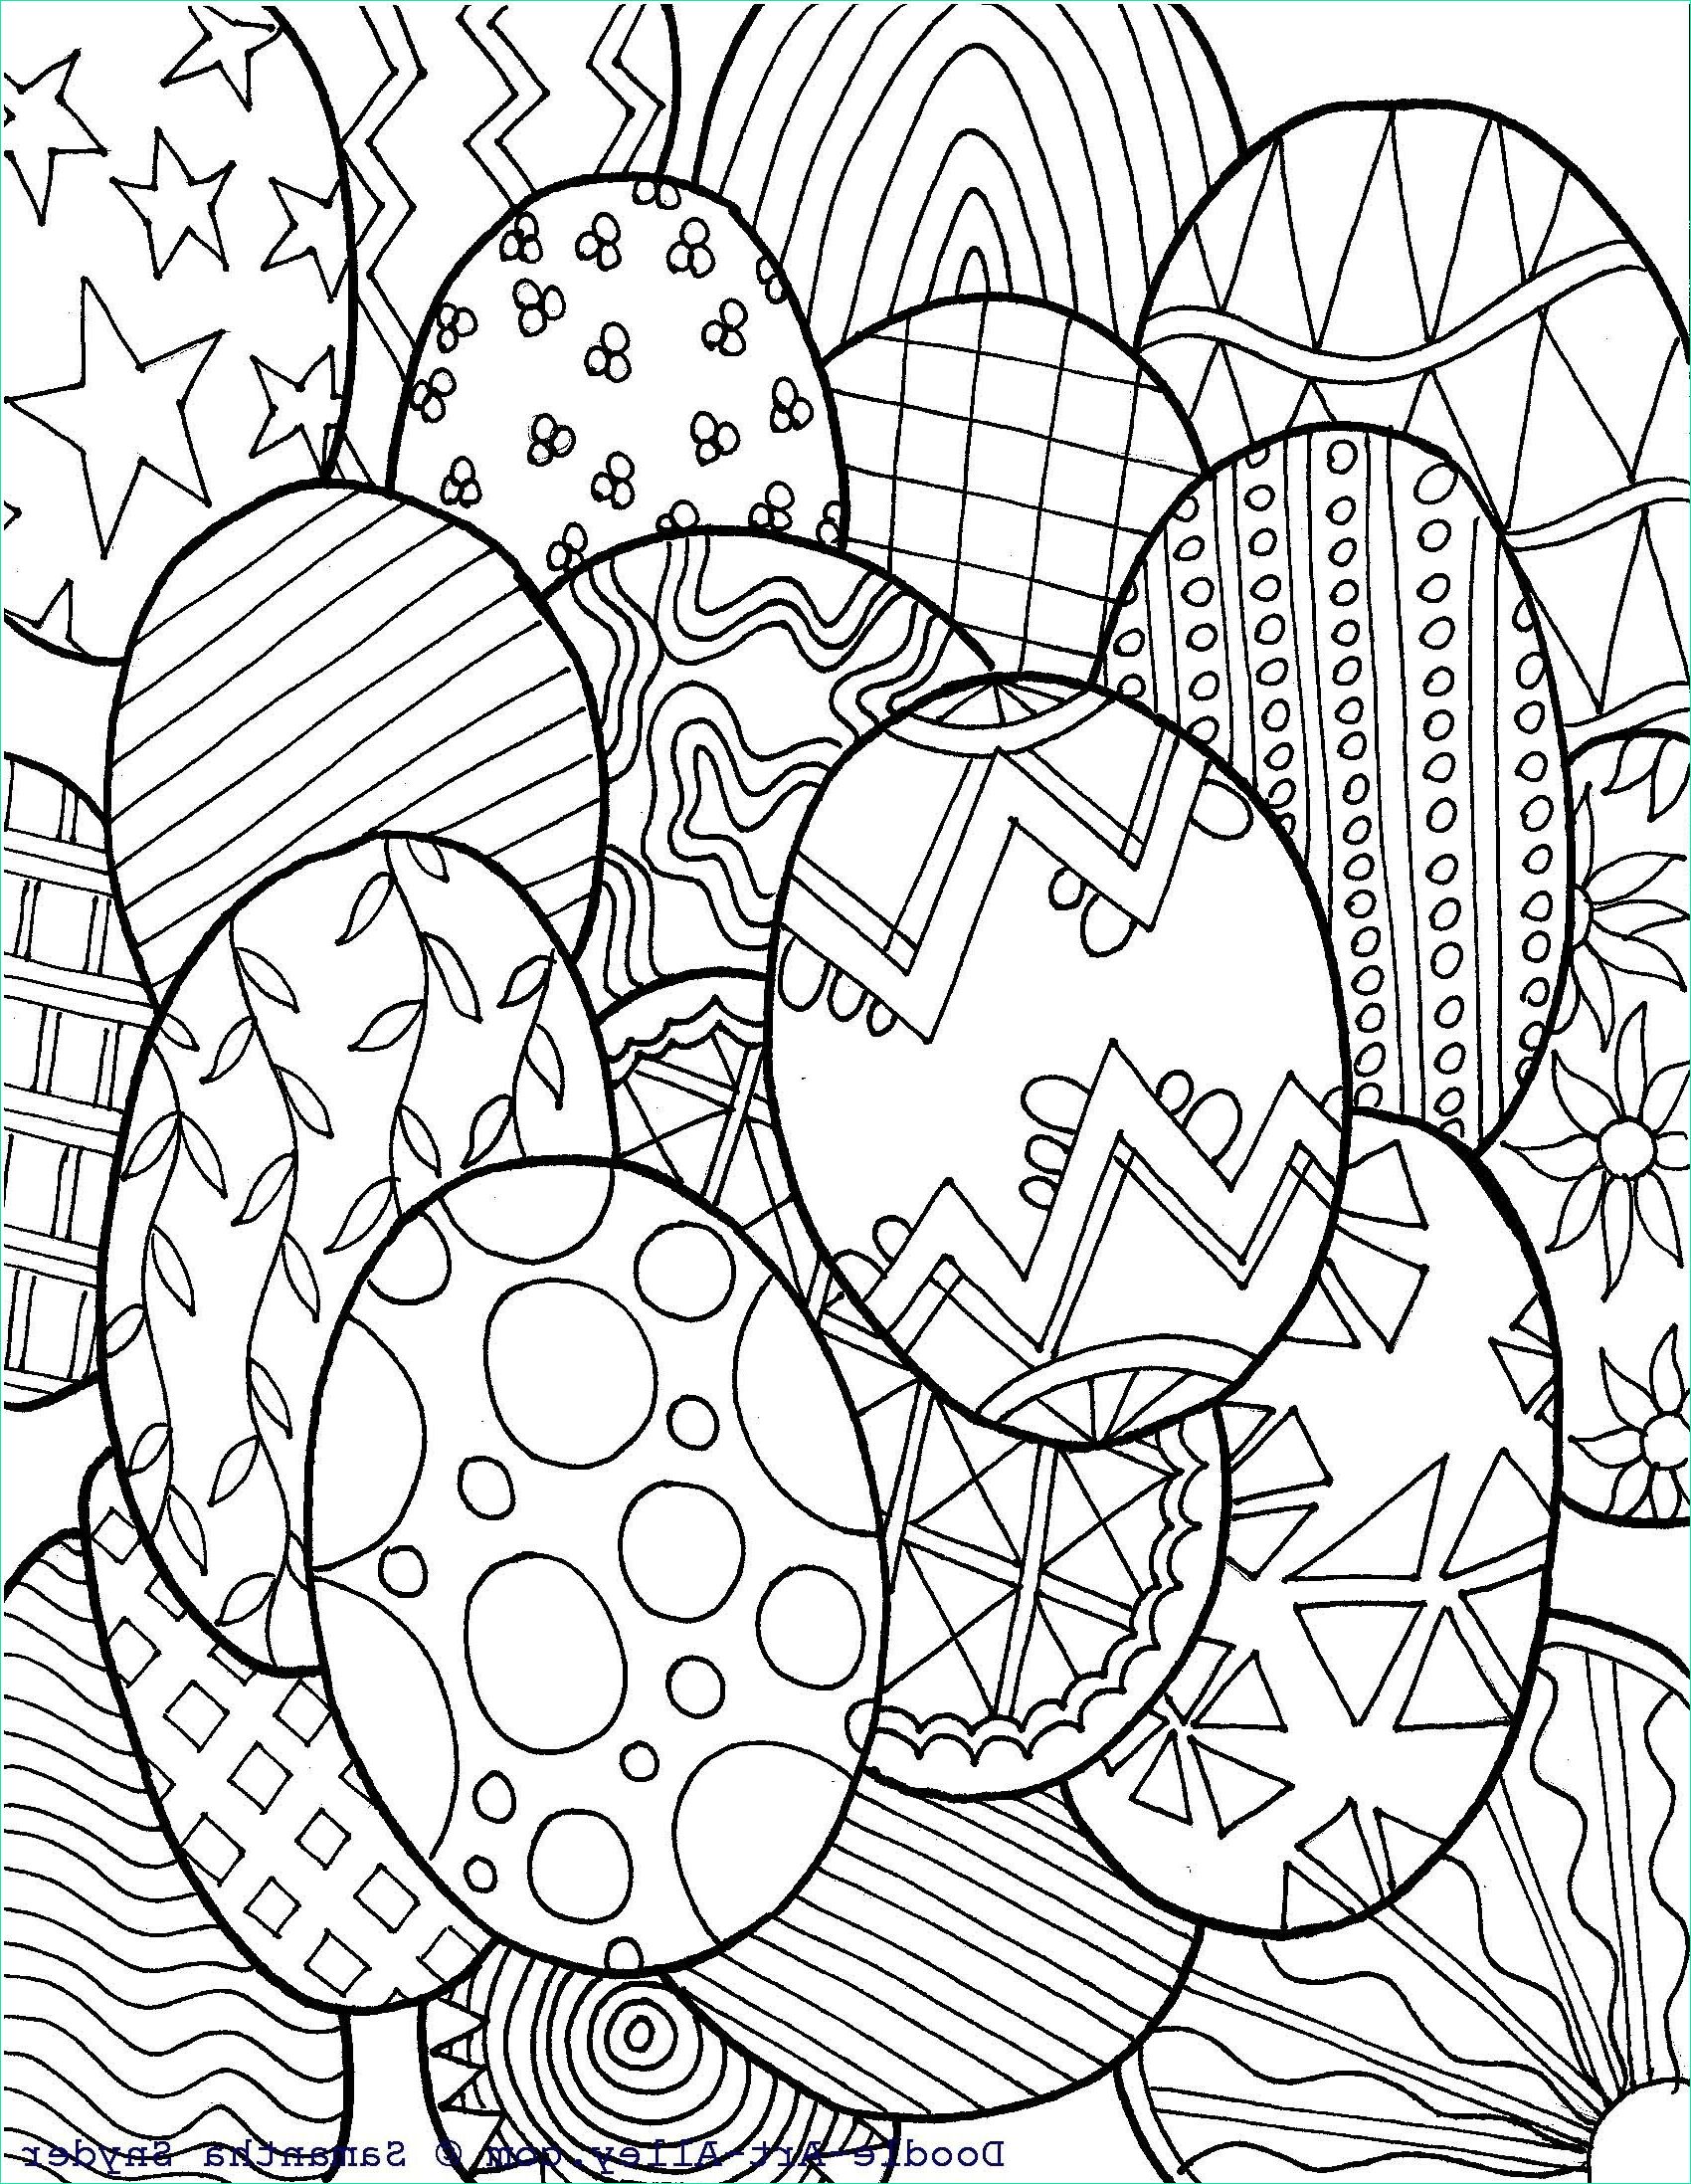 Coloriage Paques Mandala Bestof Photos Free File Sharing and Storage Made Simple